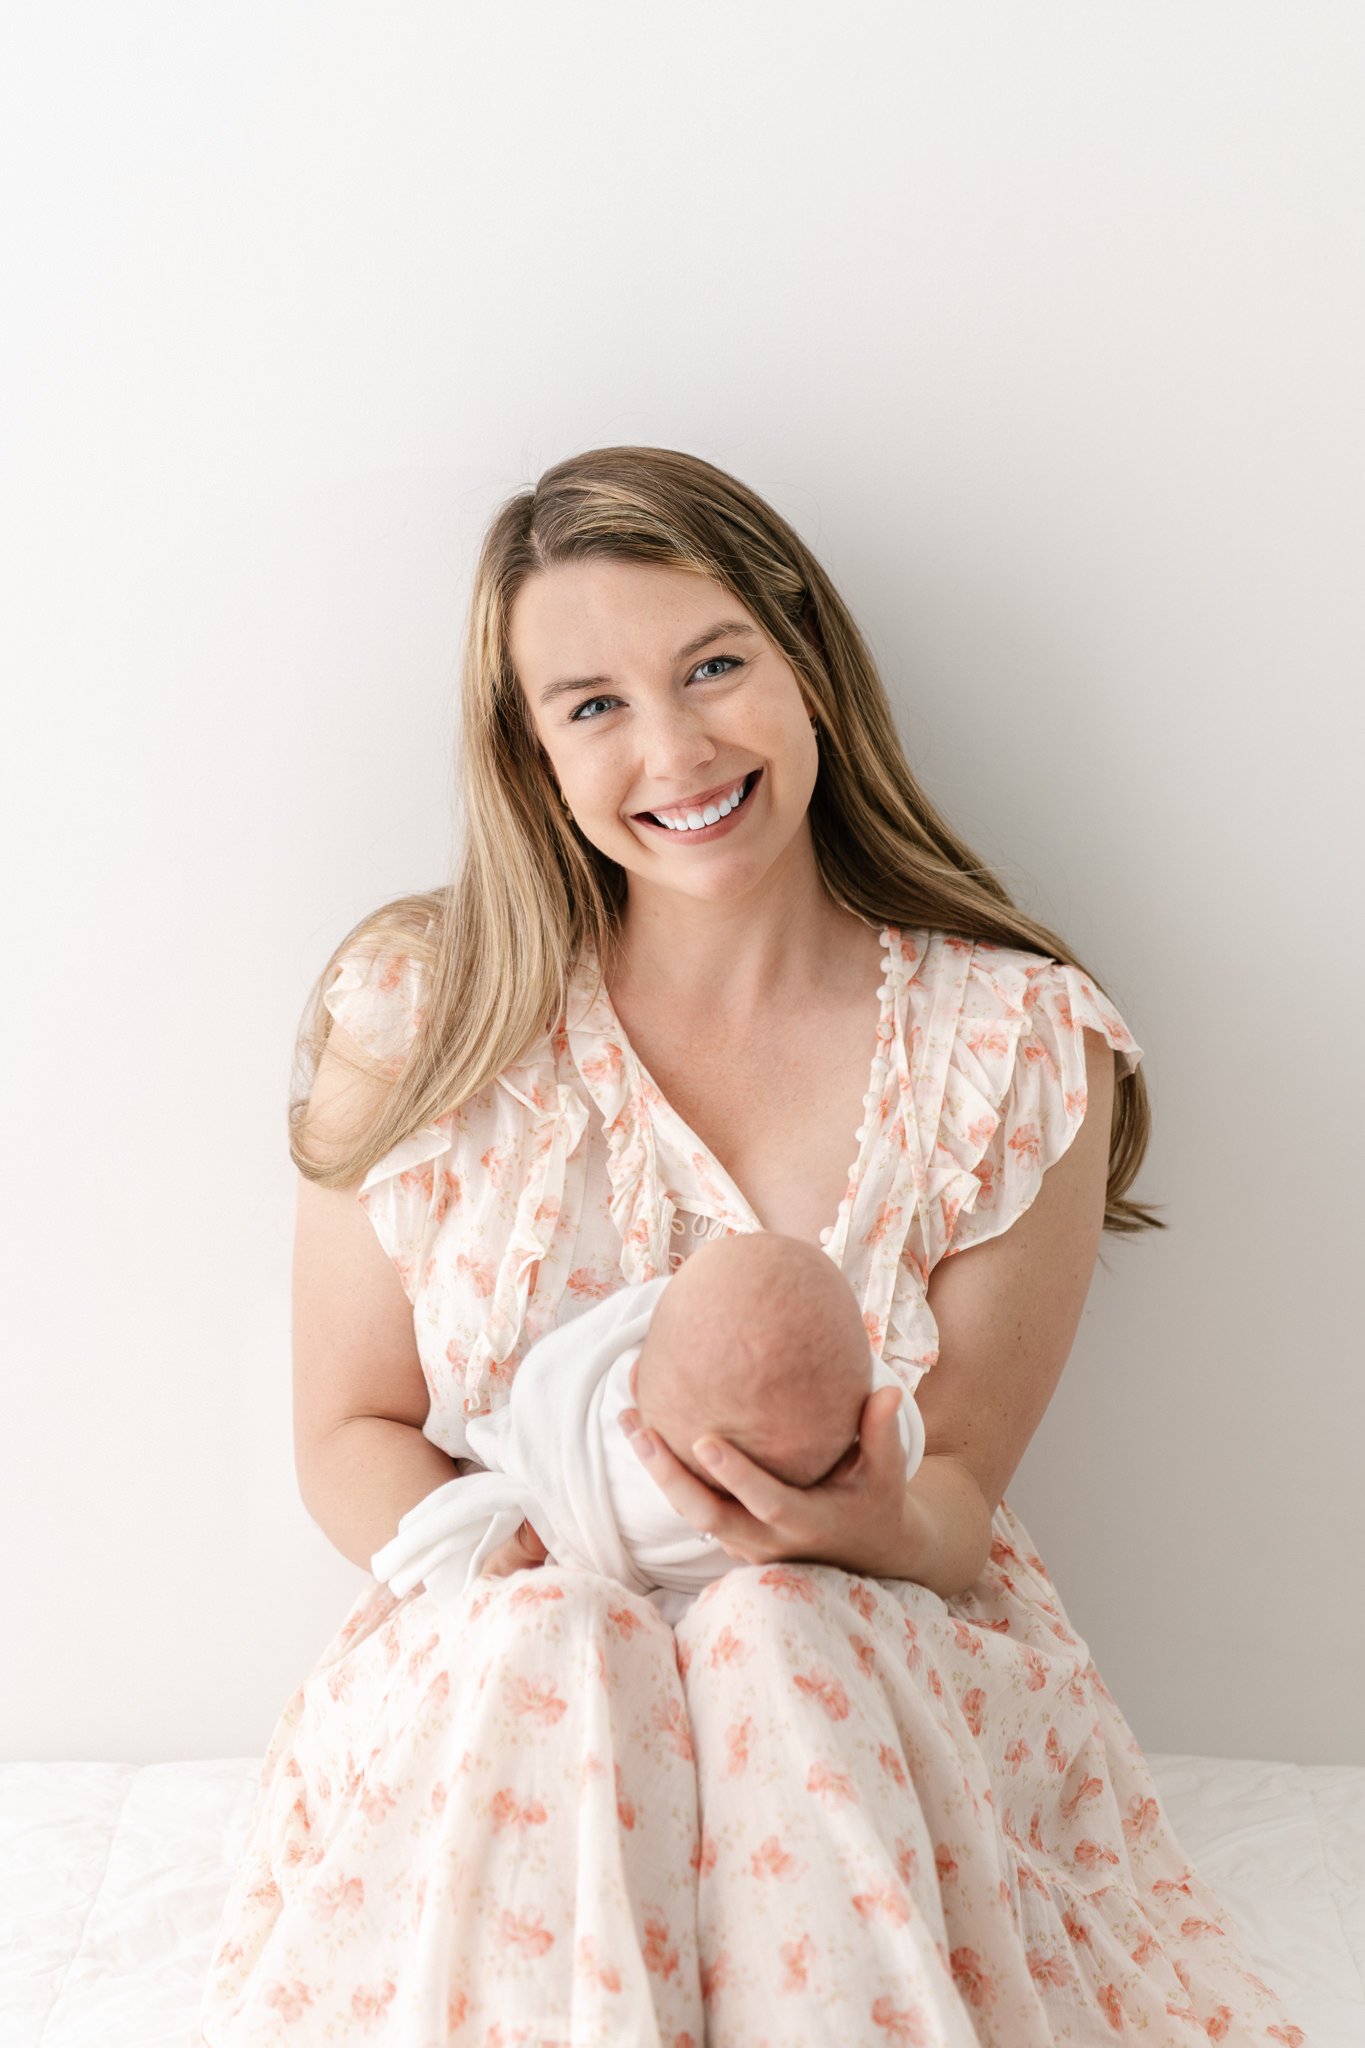  Nicole Hawkins Photography captures a portrait of a new mother and her glowing smile. mother dress women outfits for newborn portraits east coast mothers #NicoleHawkinsPhotography #NicoleHawkinsNewborns #StudioNewborn #StudioFamily #EastCoastNewborn